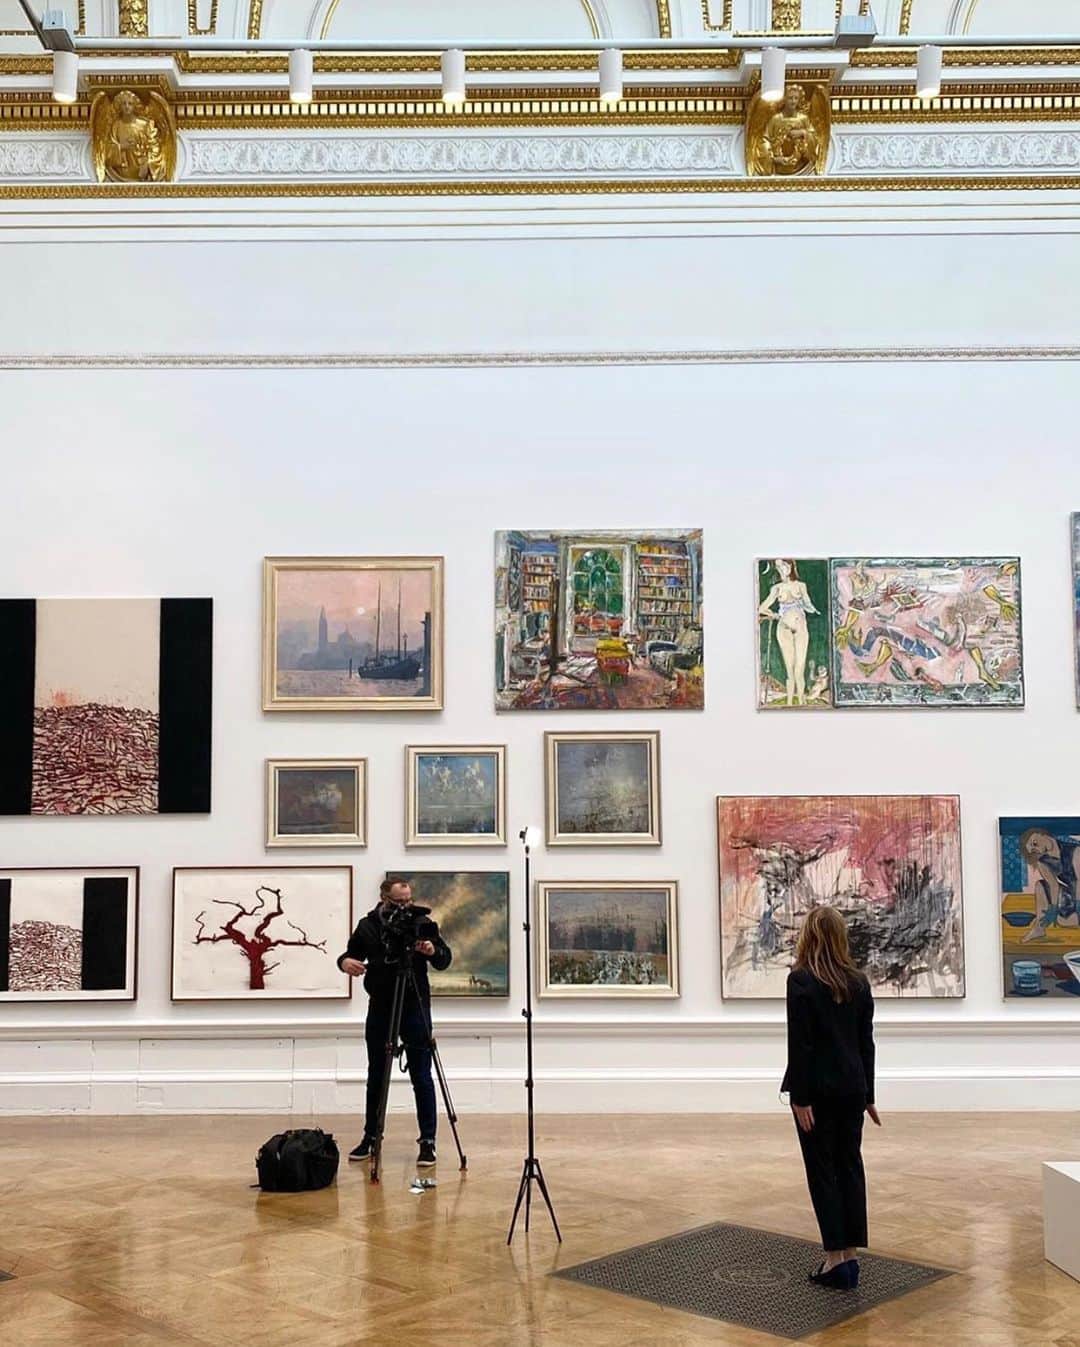 @LONDON | TAG #THISISLONDONさんのインスタグラム写真 - (@LONDON | TAG #THISISLONDONInstagram)「@belleannee with art news! 🖼  Better late than never. @RoyalAcademyArts “Summer” Exhibition opens TOMORROW & marks the first time in RA’s 252 years that the Summer Exhibition has been postponed until autumn. 😱 (Note that it has never been cancelled! Think of what has happened beyond the gates over those years!). 🙌🏼 It also marks the first time two women have co-coordinated the exhibit. 💪🏼 This year there are tons of poignant works dealing with topics of the day - and there are also many minority and under-represented artists on show. And there are some heavy hitters that fall into all three of those categories which is super cool. Shortly after you enter, have a look for the Zanele Muholi portrait. Zanele is fascinating and is worth looking up. Also note the Njideka Crosby piece - and if you haven’t seen “The Price of Everything”, look that up too (ugh, sorry, I sound like my mom). 😆 Toward the middle to end spend time with the Ai Wei Wei urns - really look at the story he is telling. (Disclosure, he is guest number 1 at my imaginary dinner party) ◻️  Now, onto the photos I included The first is an assemblage of photographs by Isaac Julien RA taken 35 years ago but that could have been taken yesterday. Spend time with those. ◻️ Next shot is someone very important doing an interview. Then the small portraits by Anne-Marie Butlin. I know that I did not take a great photo but look closely - how can someone create that kind of life with a paint brush and tubes of color? Amazing. ◻️ I think that the woman’s trousers match that big column, don’t they? ☺️ Also - loving those colourful pieces in the background by Joe Tilton RA ◻️ Sneak peek at the Ai Wei Wei urns (mmmmm, & a flat Mercedes behind them). ◻️ & I missed that really cool wave picture / painting / drawing at the top of this photo & now I can’t zoom in on the number to tell you anything about it but isn’t it amazing how you can totally miss something the first time but then it calls to you? 🙌🏼 *sigh* I love art. ❤️ I wish I’d have been born a Saatchi. ◻️ Also the weird wiener thing can be yours for £1200. Go ahead, I won’t fight you for it this time. ◻️  The cafe opens at 11 in sweet temporary dig! ☕」10月5日 19時12分 - london